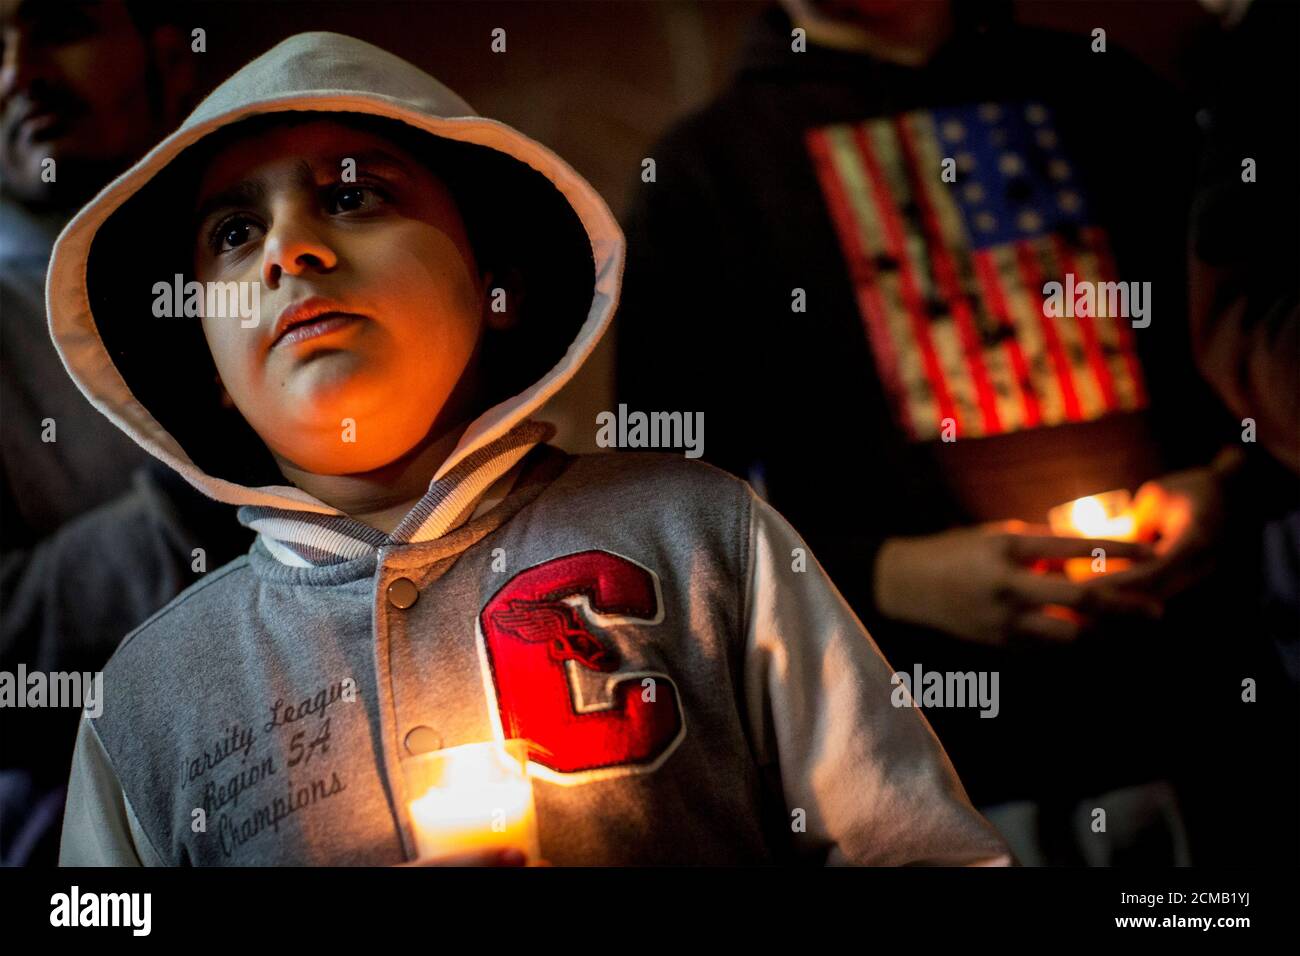 People hold candles during a vigil for victims killed in the attack by Taliban gunmen on the Army Public School in Peshawar Pakistan, in the Brooklyn borough of New York December 17, 2014. Pakistan on Wednesday began burying 132 students killed in a grisly attack on their school by Taliban militants that has heaped pressure on the government to do more to tackle an increasingly aggressive Taliban insurgency. REUTERS/Brendan McDermid (UNITED STATES - Tags: EDUCATION CRIME LAW SOCIETY CIVIL UNREST) Stock Photo